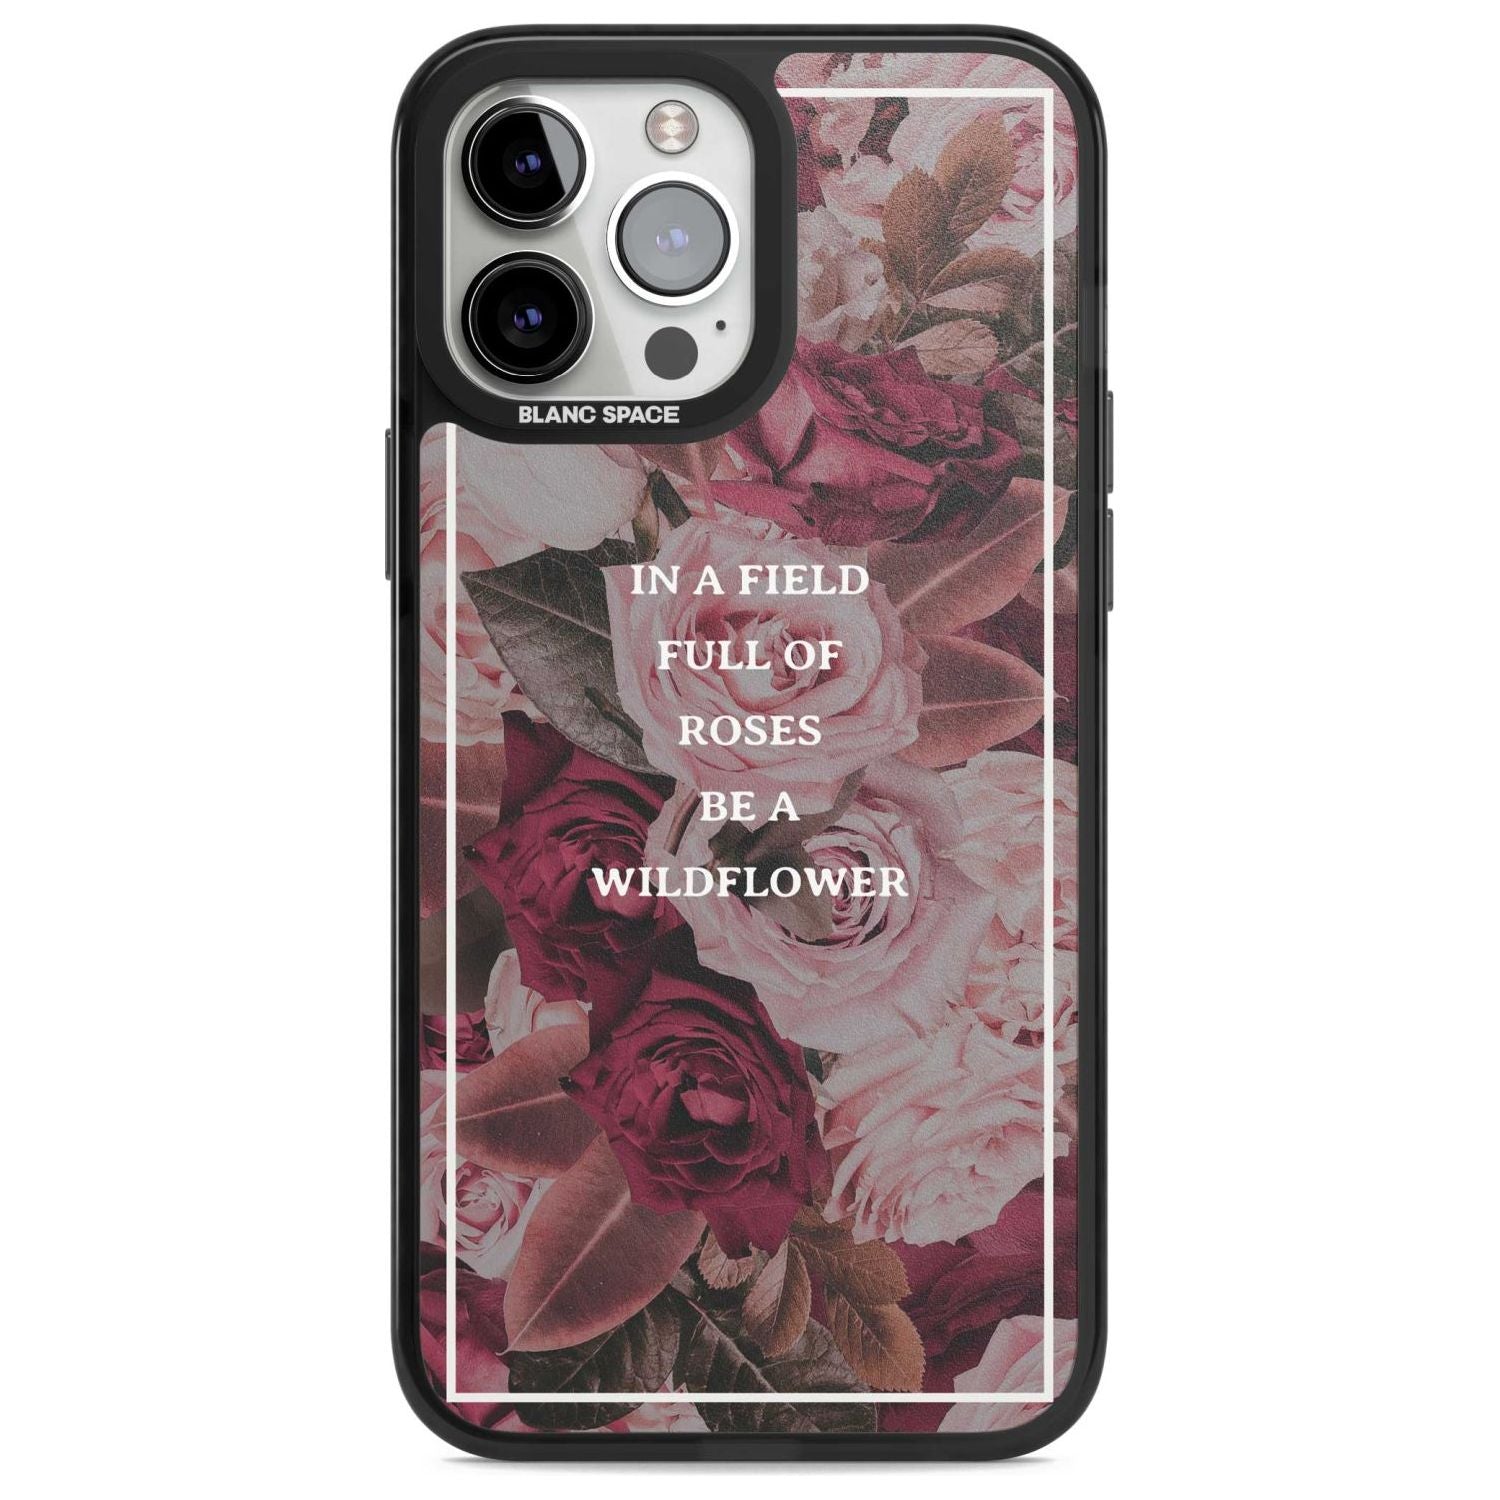 Be a Wildflower Floral Quote Phone Case iPhone 13 Pro Max / Magsafe Black Impact Case Blanc Space